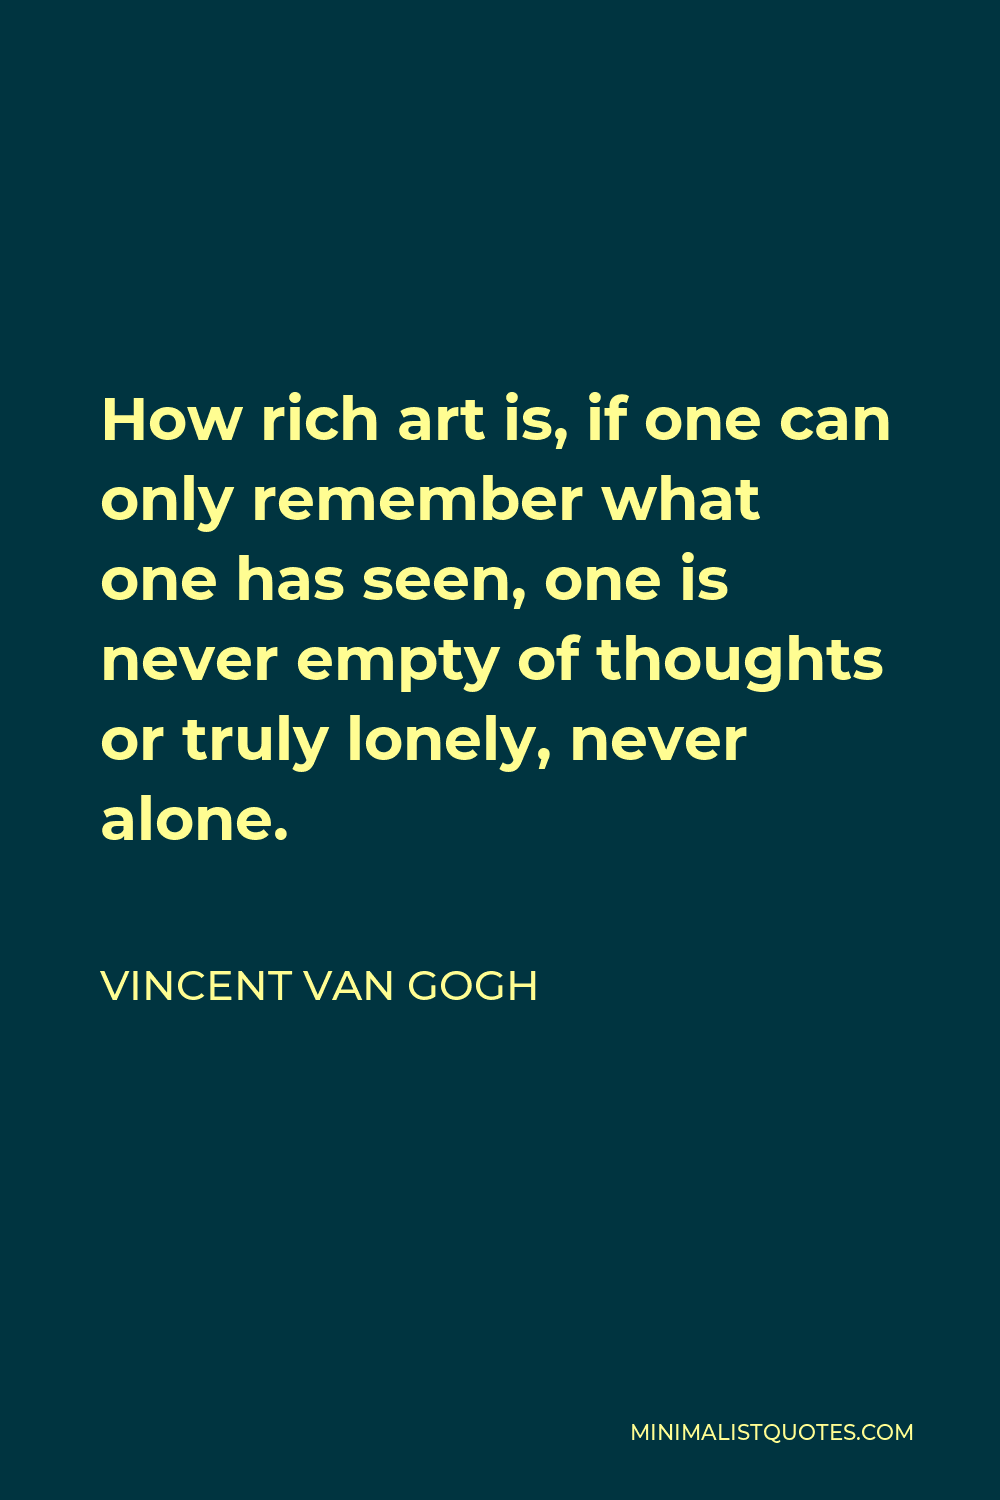 Vincent Van Gogh Quote - How rich art is, if one can only remember what one has seen, one is never empty of thoughts or truly lonely, never alone.